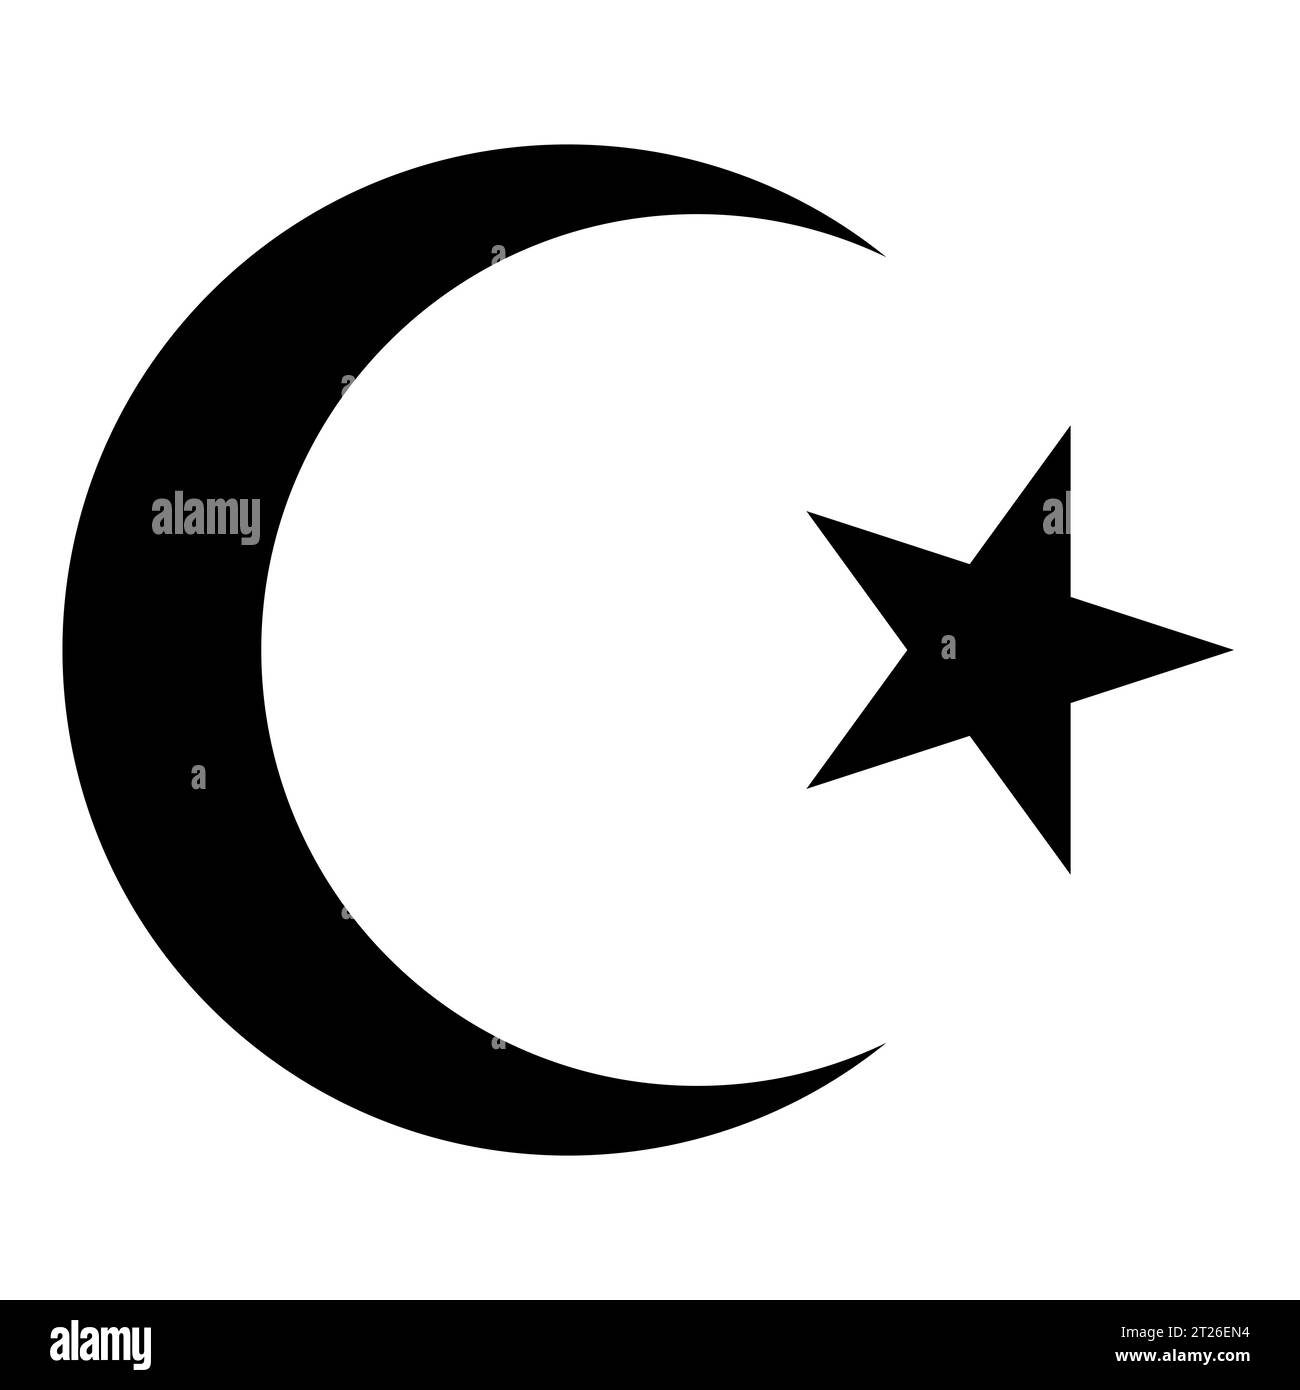 Islamic star and crescent moon, black and white vector illustration symbol of Islam, isolated on white Stock Vector